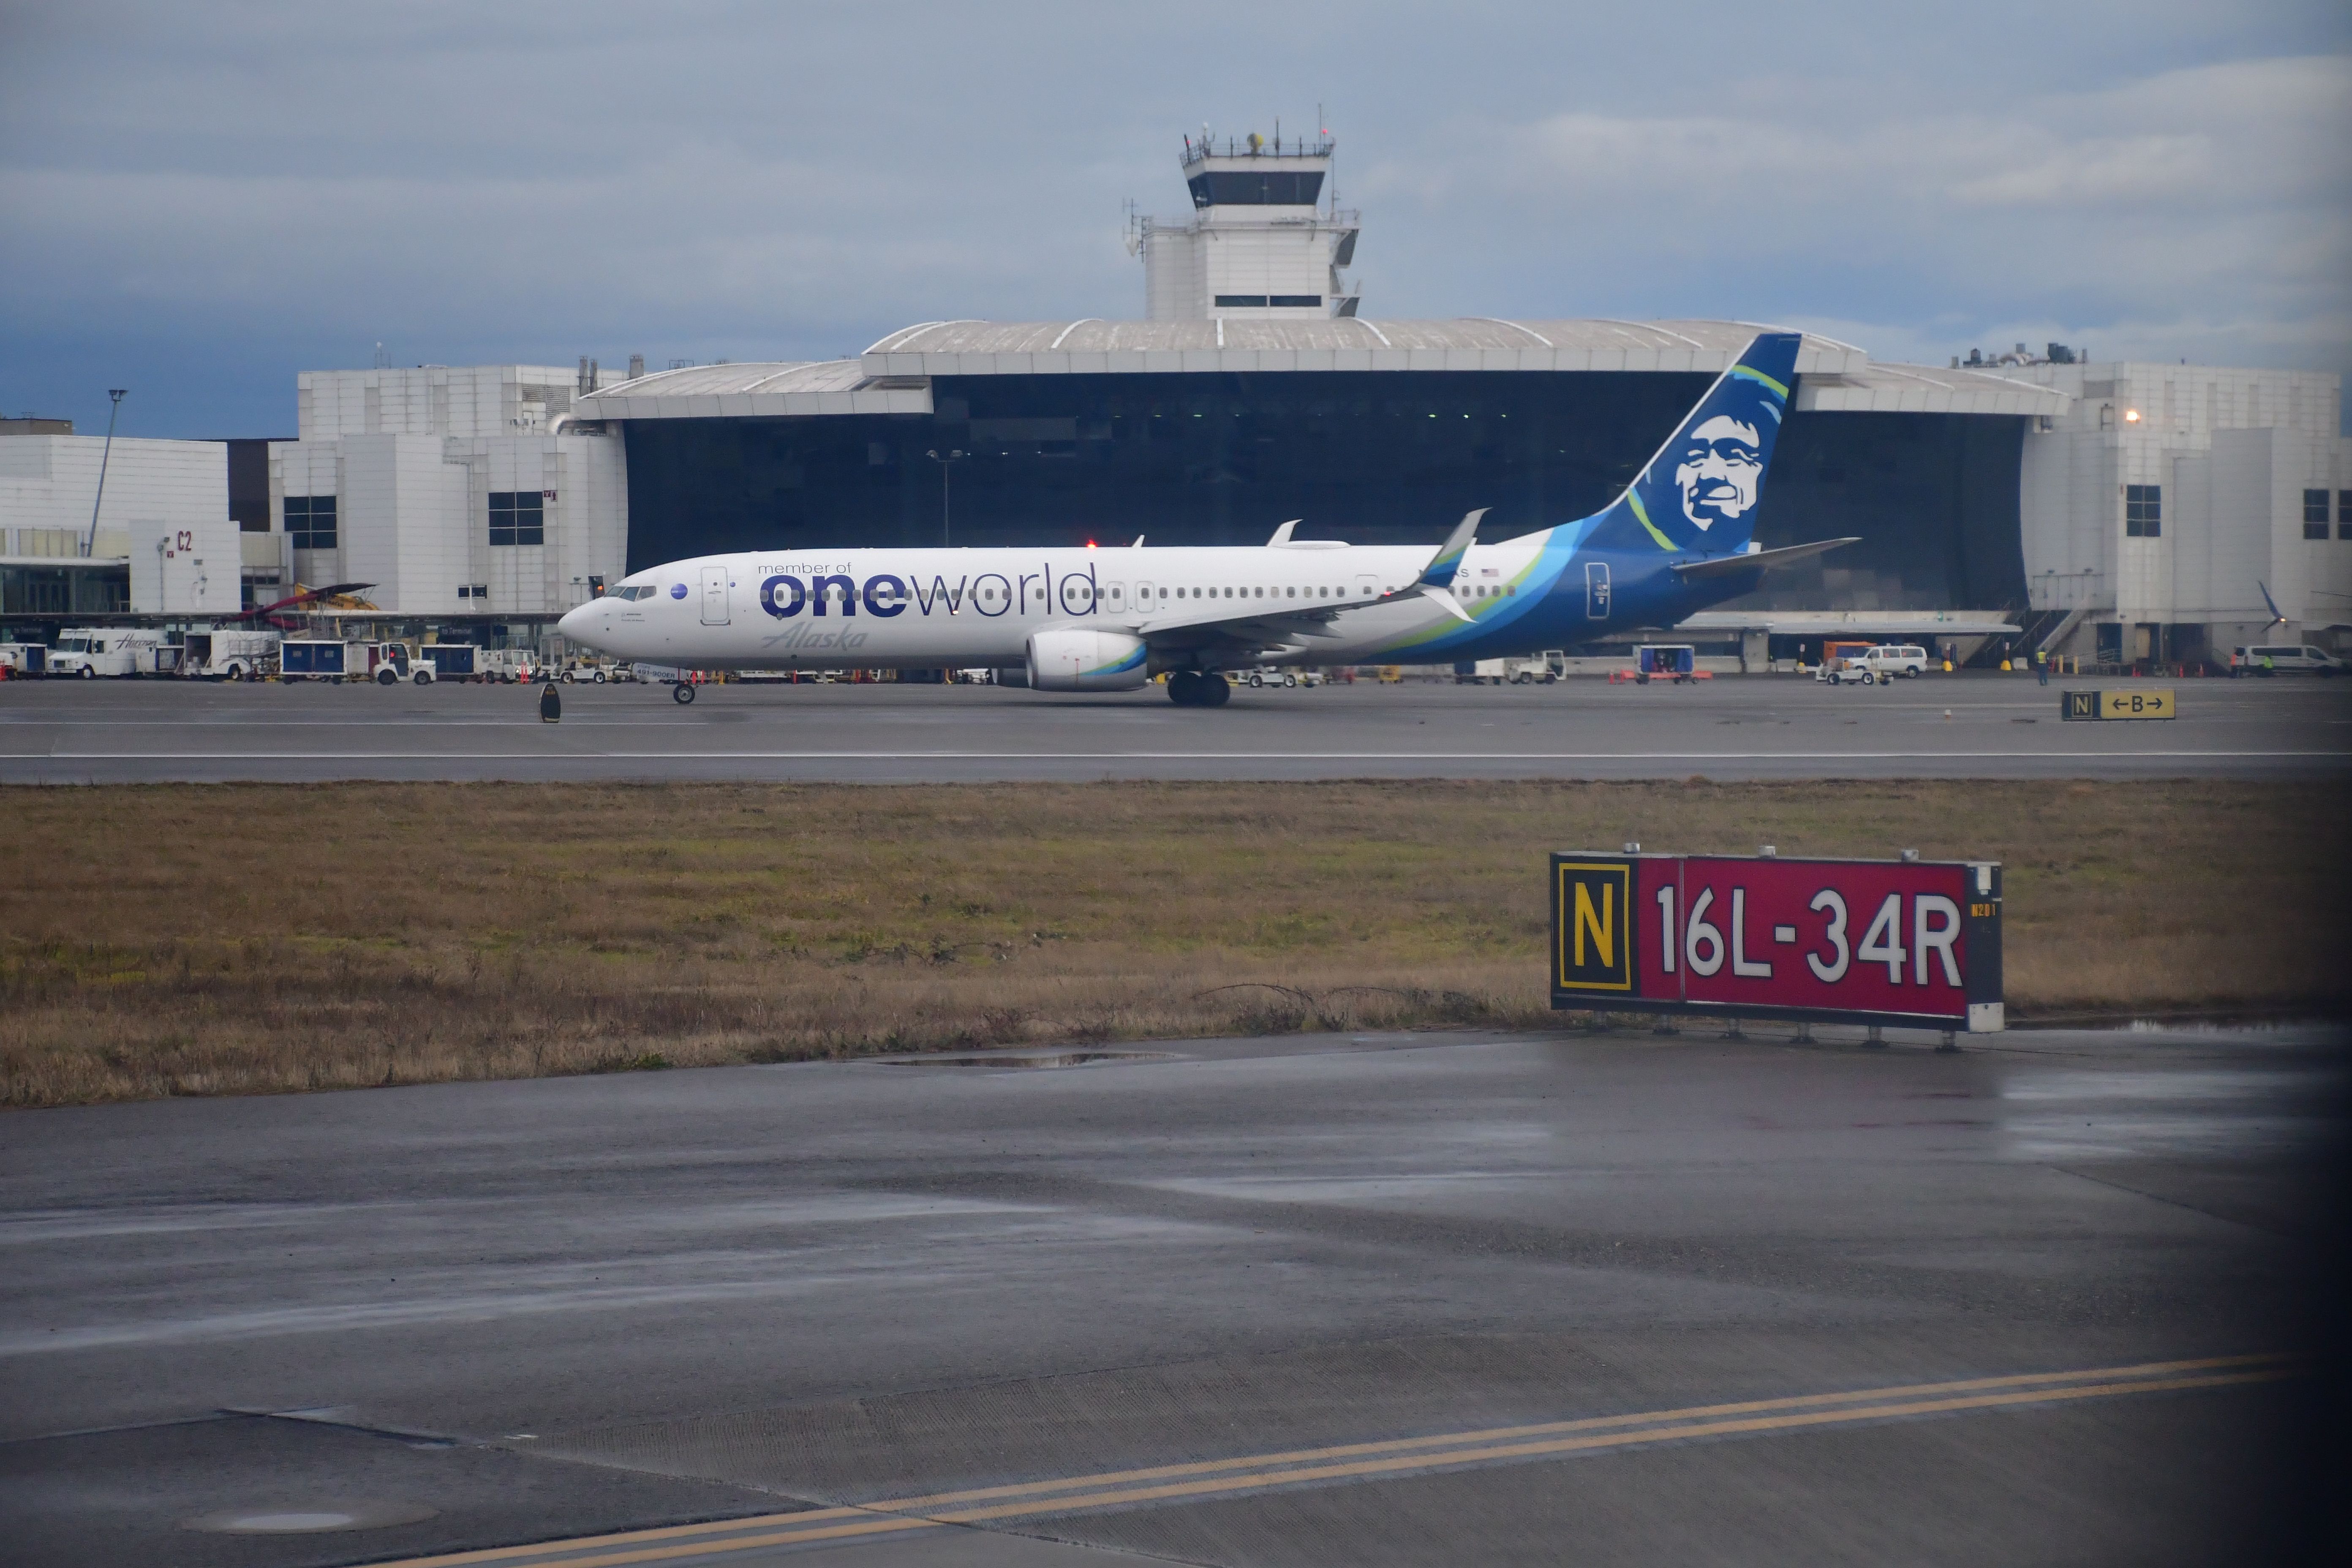 DSC_8063 - Alaska Airlines oneWorld 737-900ER in front of Seattle-Tacoma International Terminal